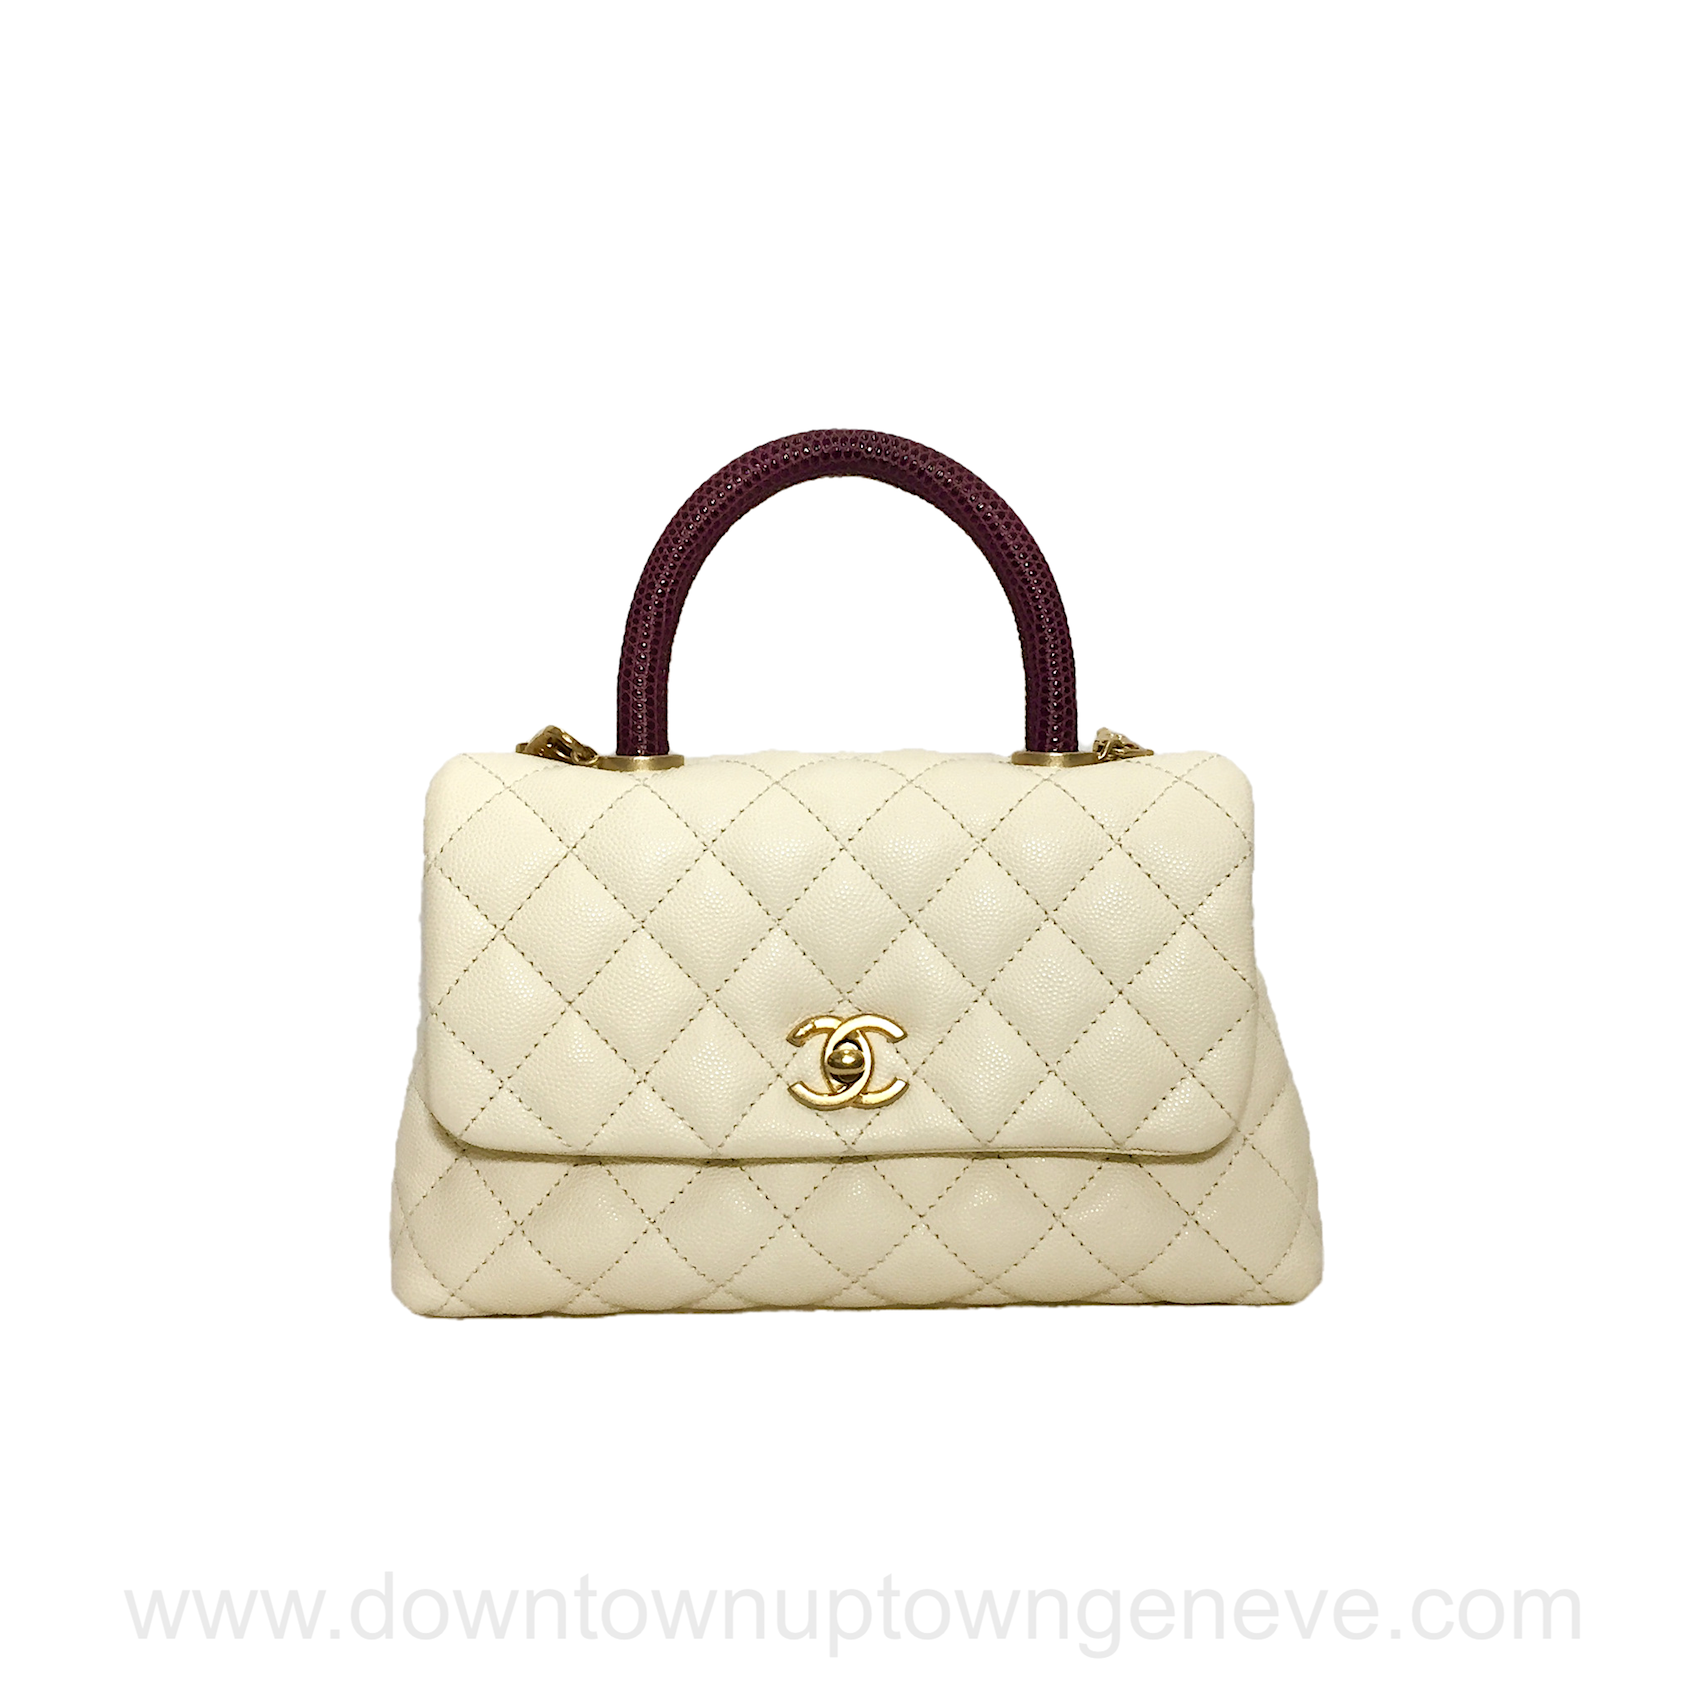 Chanel Coco Handle PM flap bag in cream caviar leather with